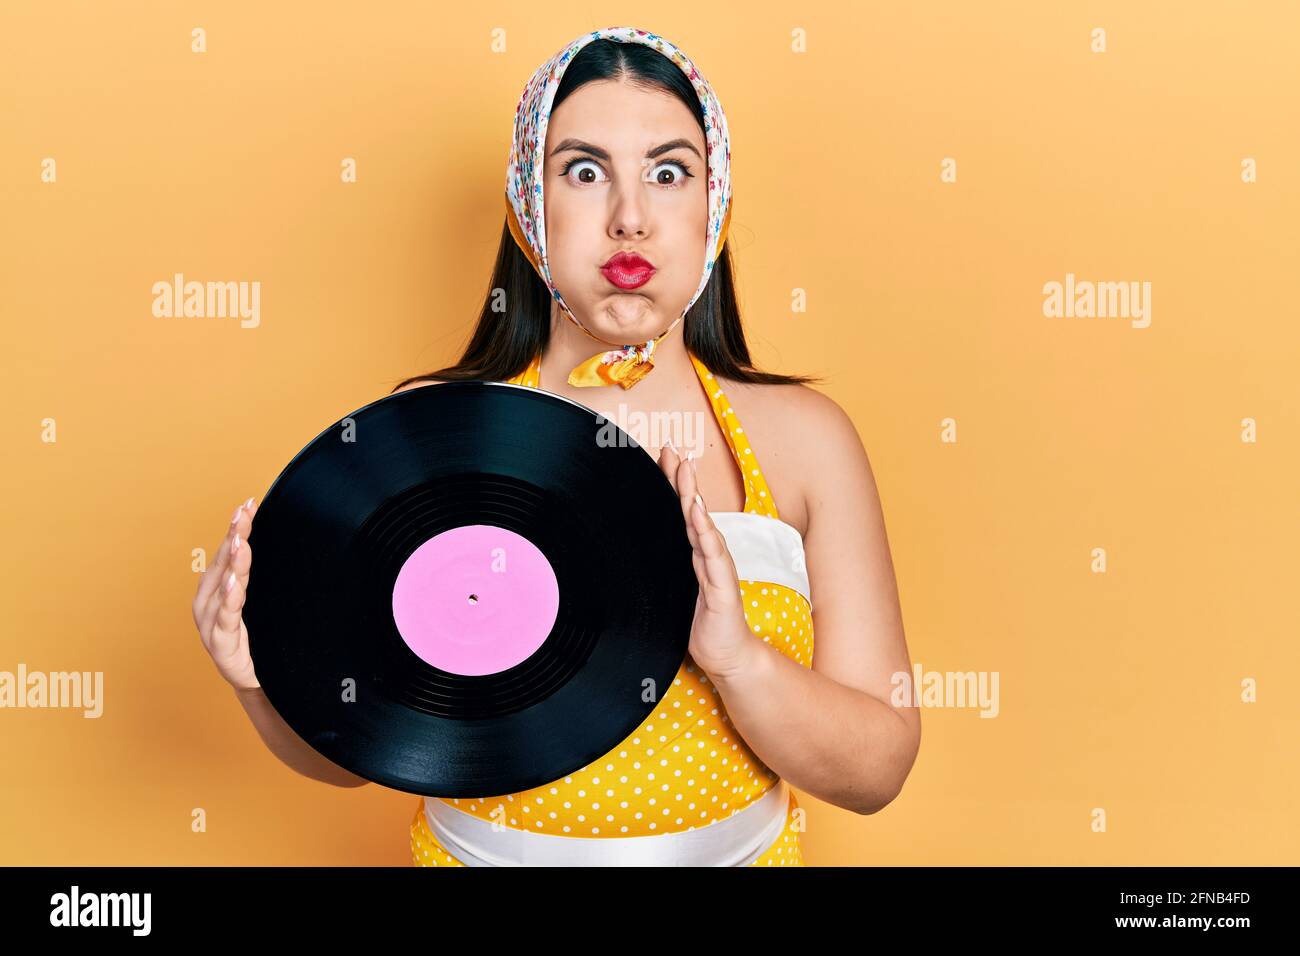 Young hispanic woman wearing pin up style holding vinyl disc puffing cheeks with funny face. mouth inflated with air, catching air. Stock Photo